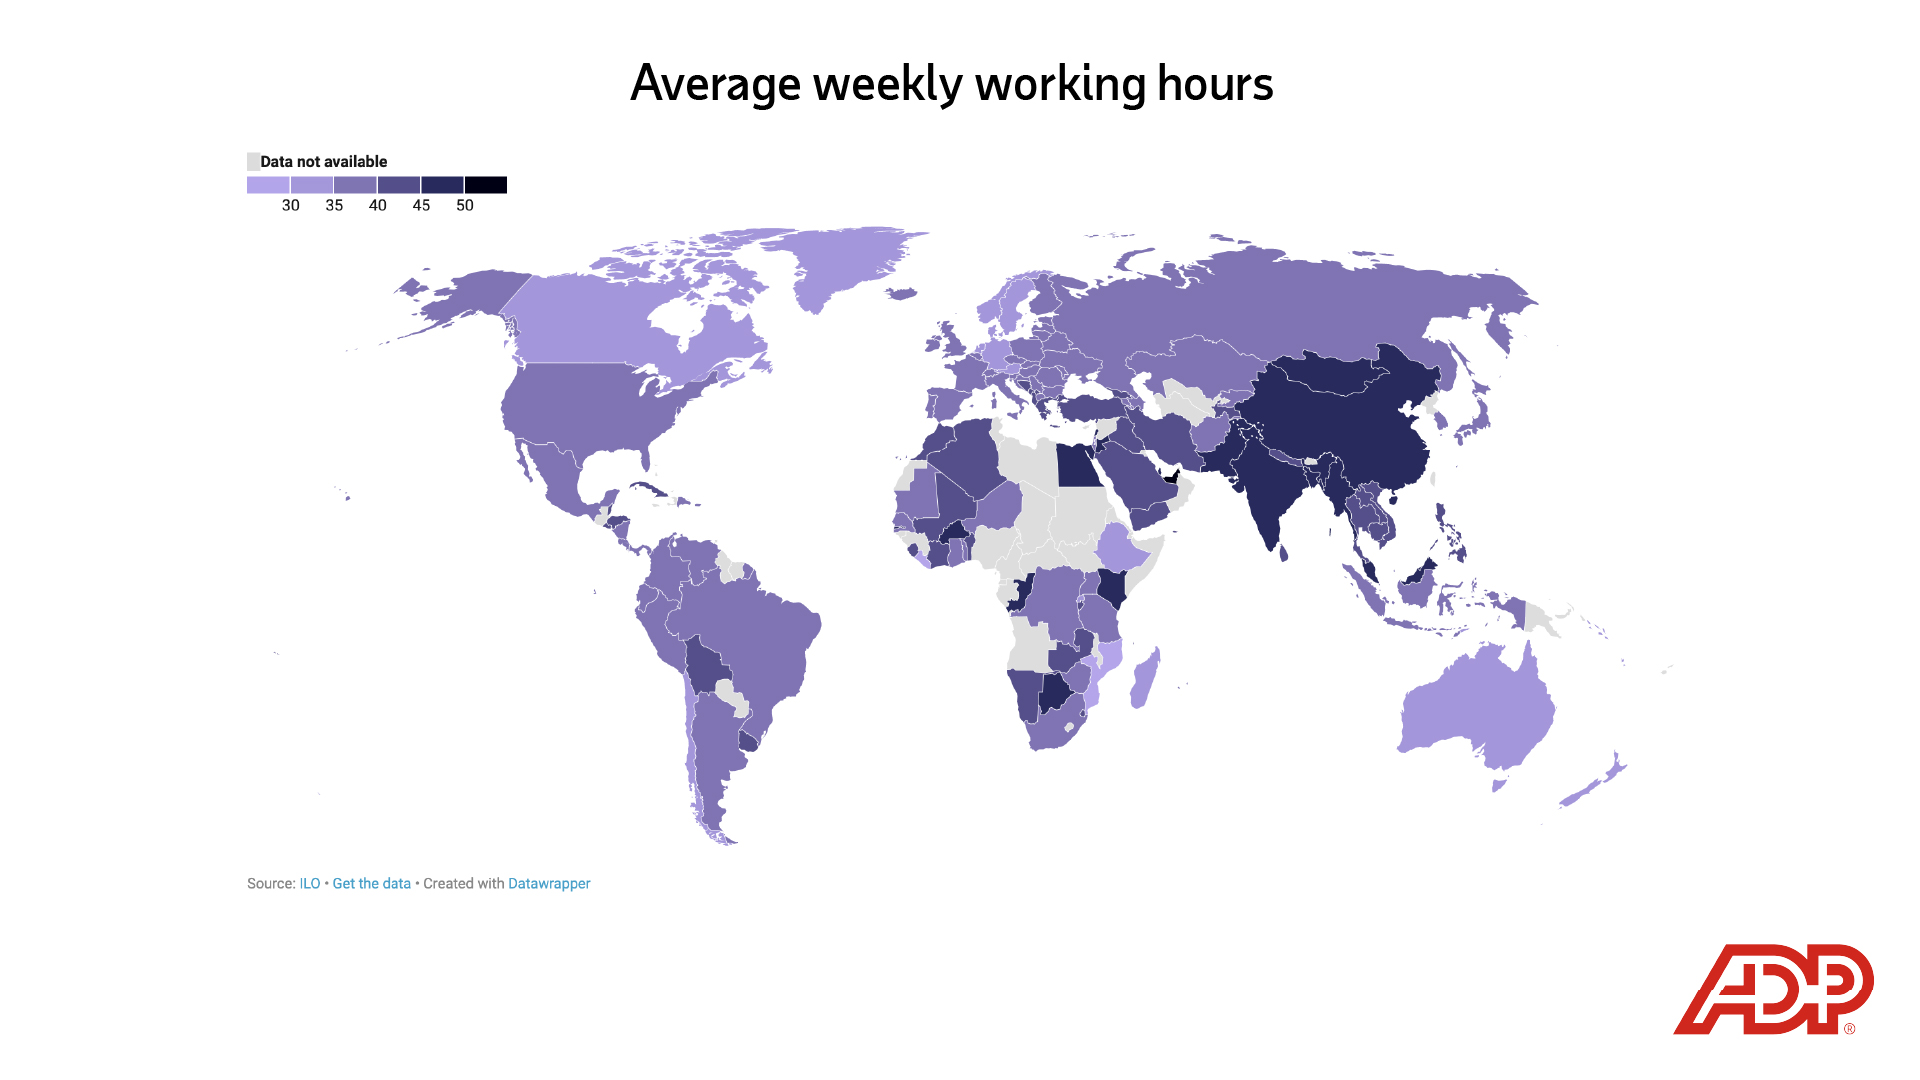 Image description: World map depicting "average weekly working hours" End of alt text.